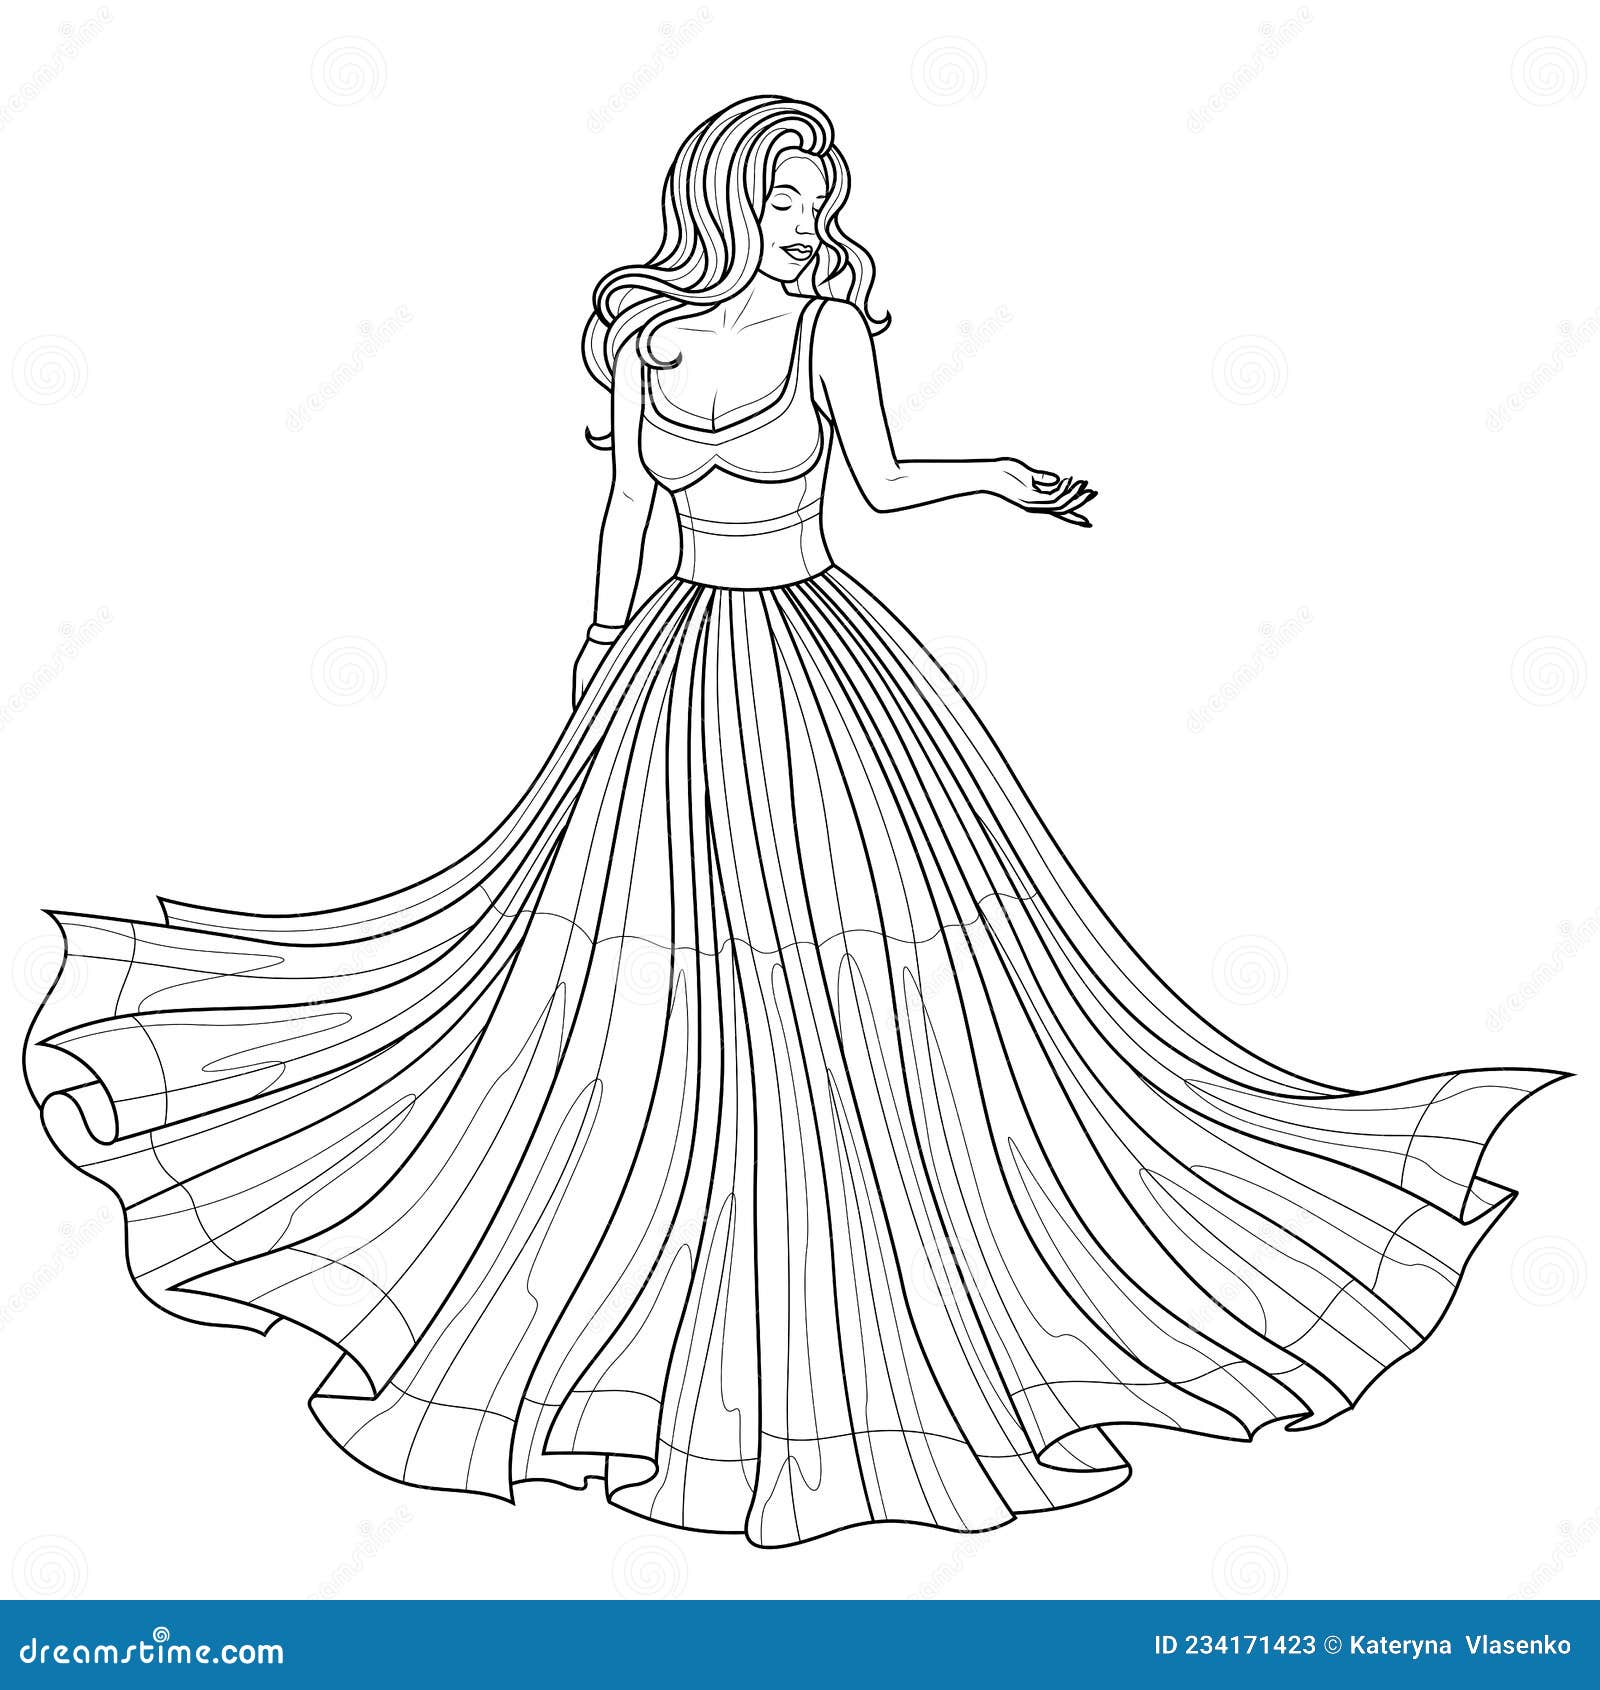 How to Draw a Girl with a Beautiful Gown